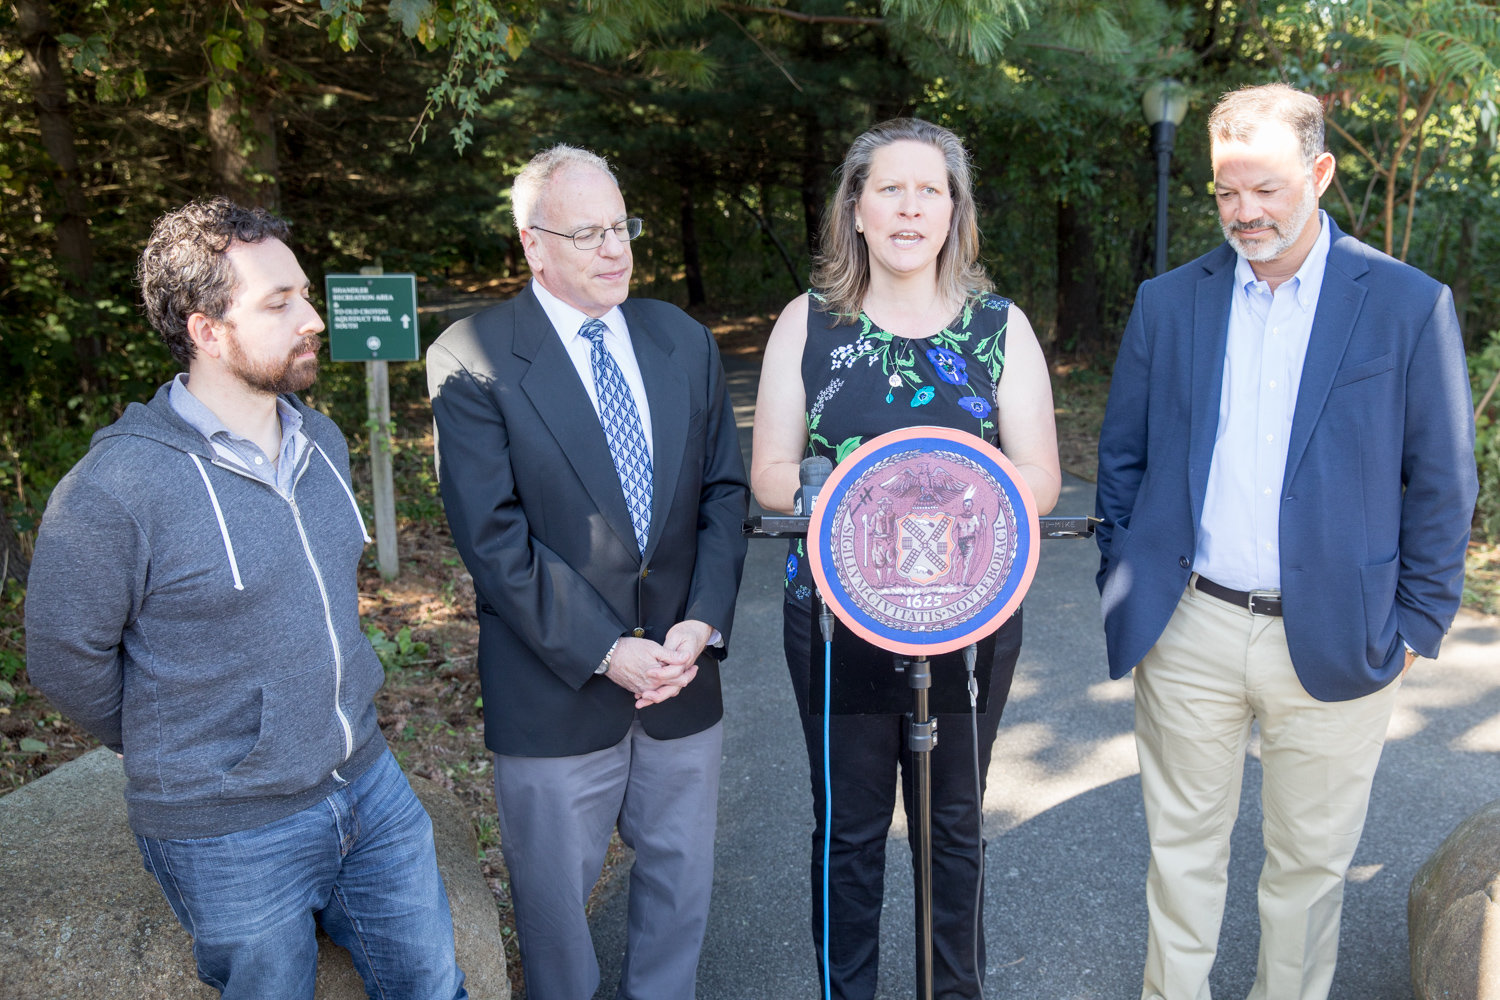 Christina Taylor, director of programs and operations at Van Cortlandt Park Alliance, is thrilled the $23.5 million needed to build a pedestrian bridge over the Major Deegan Expressway has been secured.